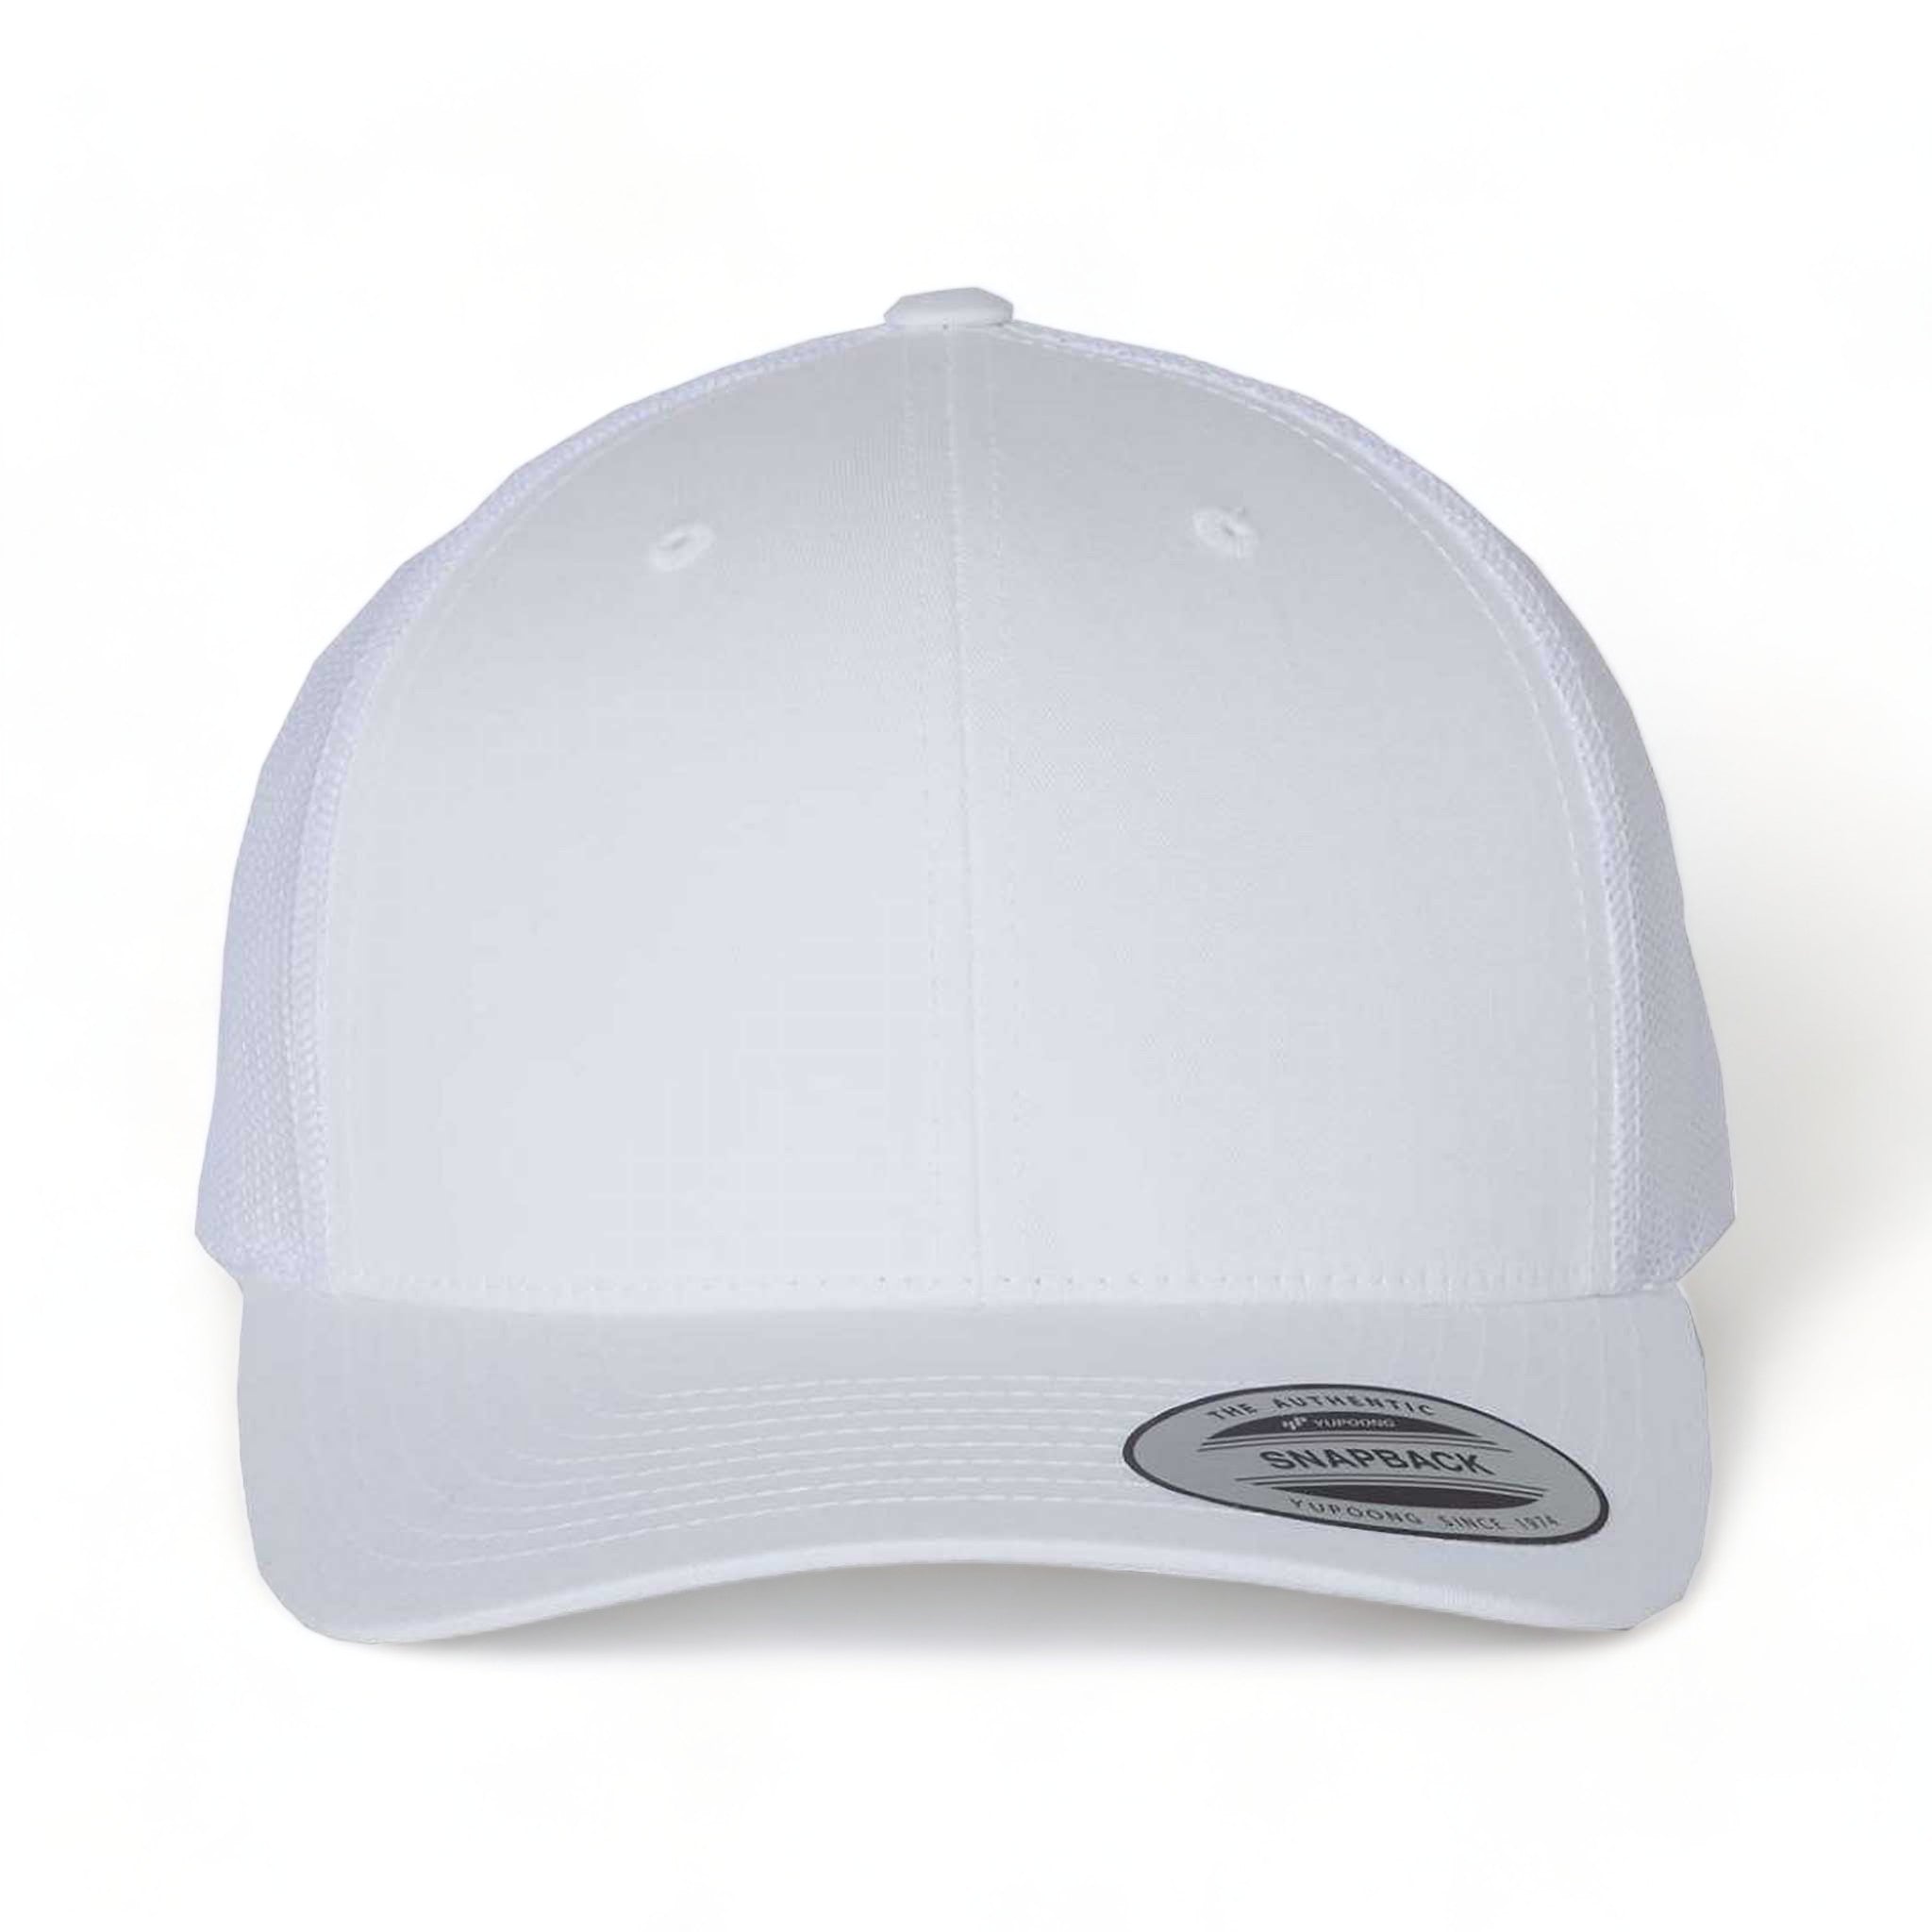 Front view of YP Classics 6606 custom hat in white